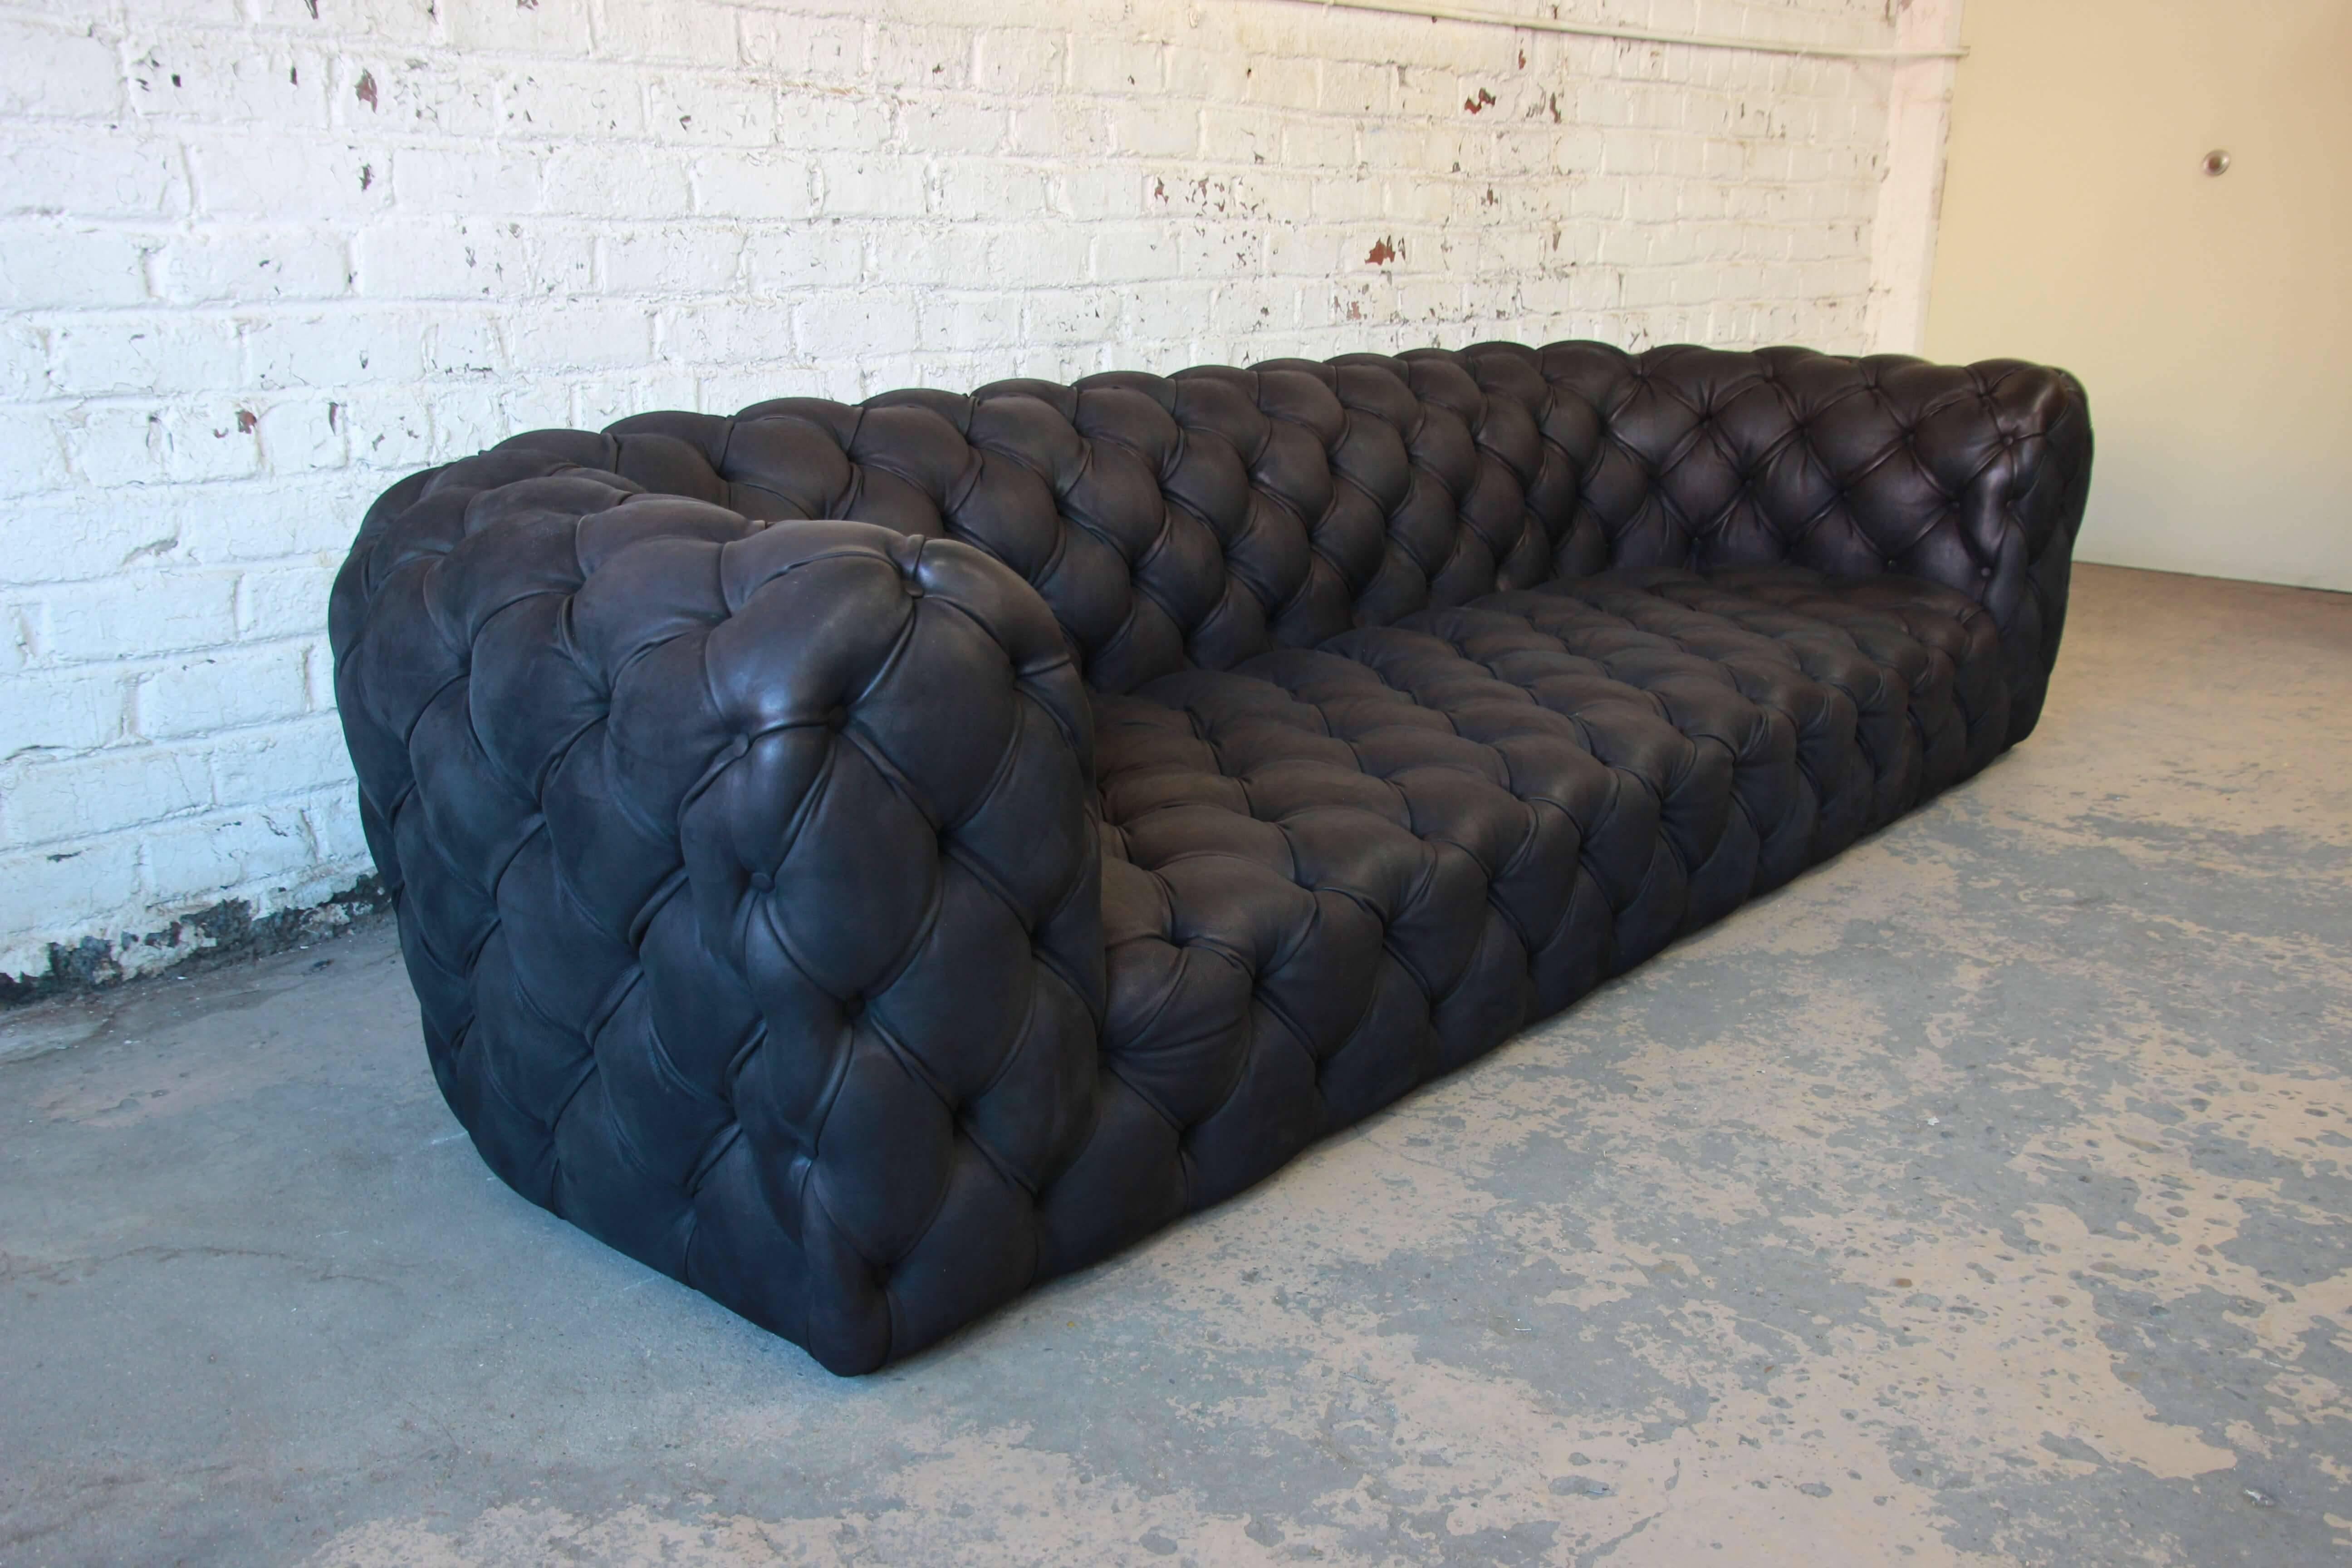 Offering an outstanding Italian tufted black leather Chester Moon sofa designed by Paola Navone for Baxter. The sofa features high grade black leather upholstery, tufted on all sides. The leather is soft and comfortable. A modern take on the English